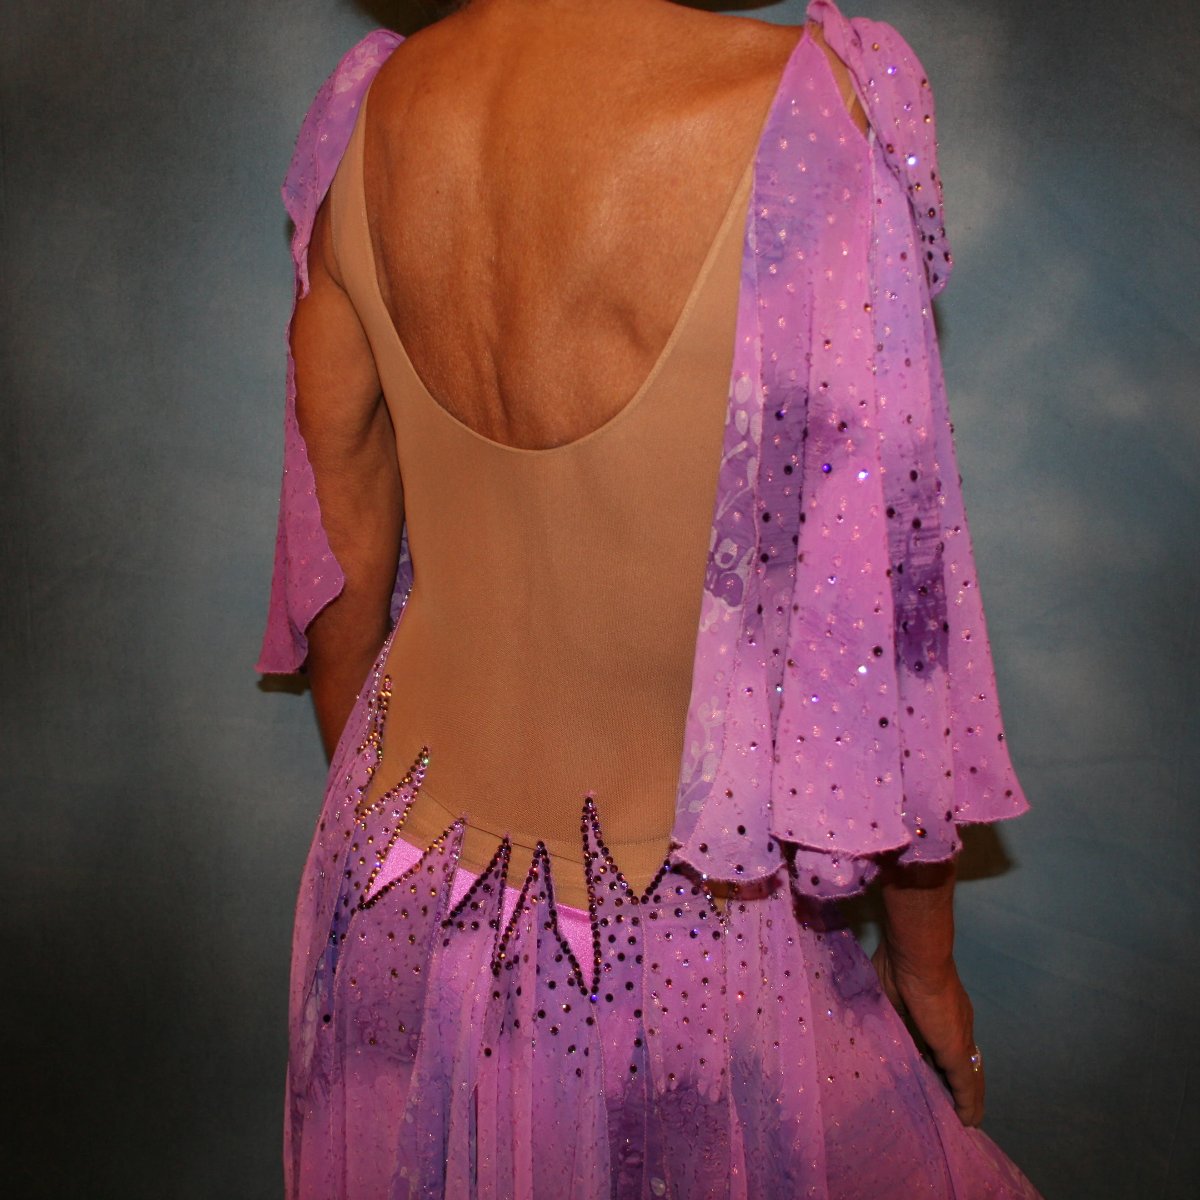 Crystal's Creations close up of backview of Orchid ballroom dress created in yards of a textured chiffon in shades of orchids & purples on a nude illusion base with floats & Swarovski stonework in gorgeous shades of orchids & purples.